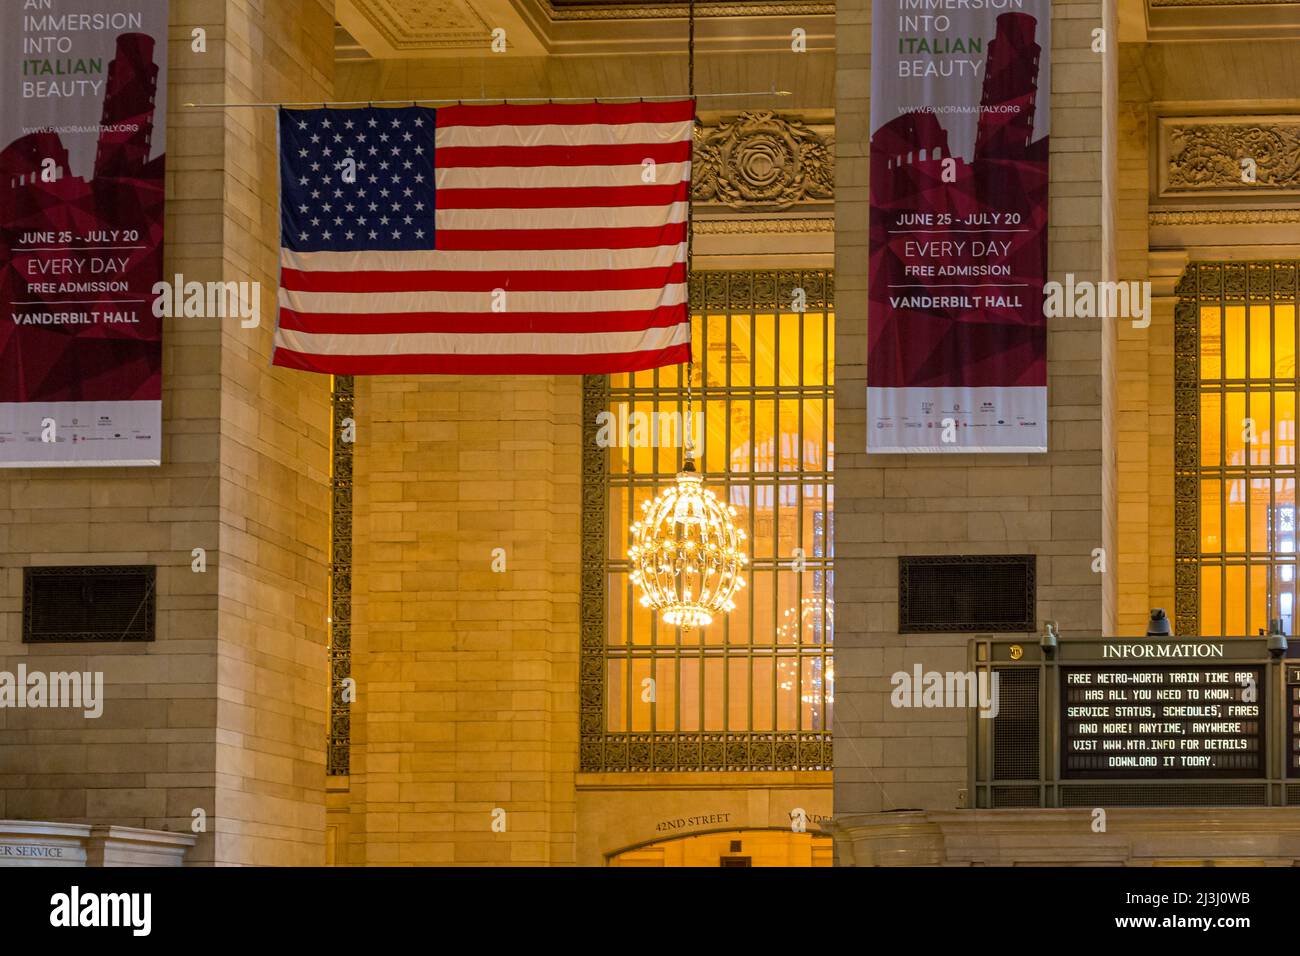 GRAND CENTRAL - 42 ST, New York City, NY, USA, Inside Central Station., american flag Stock Photo